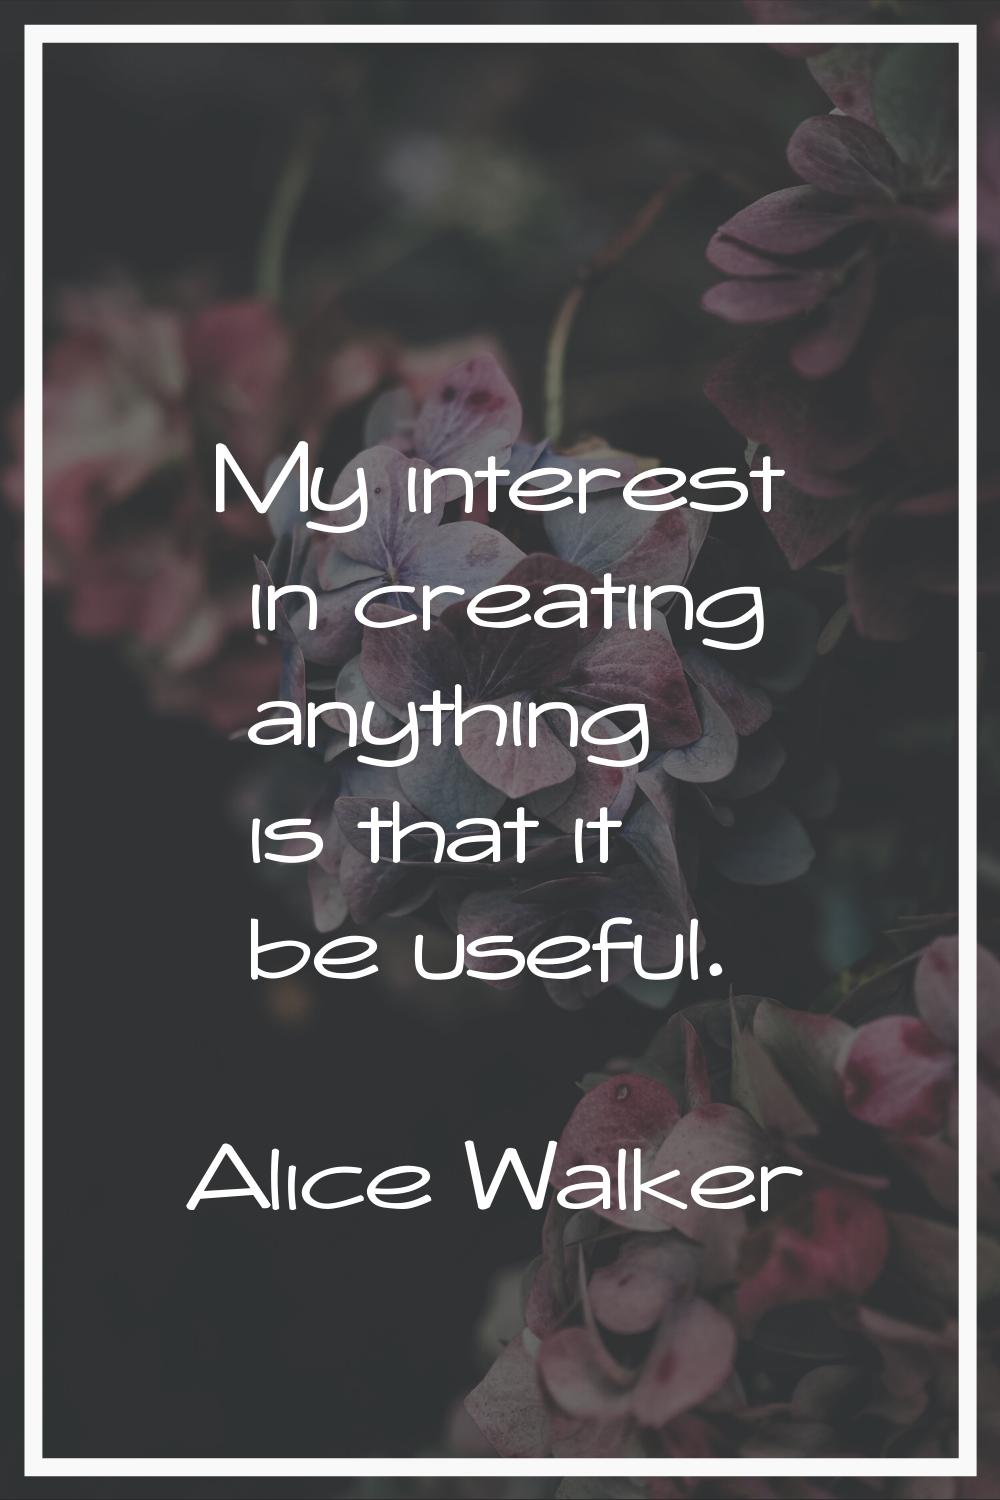 My interest in creating anything is that it be useful.